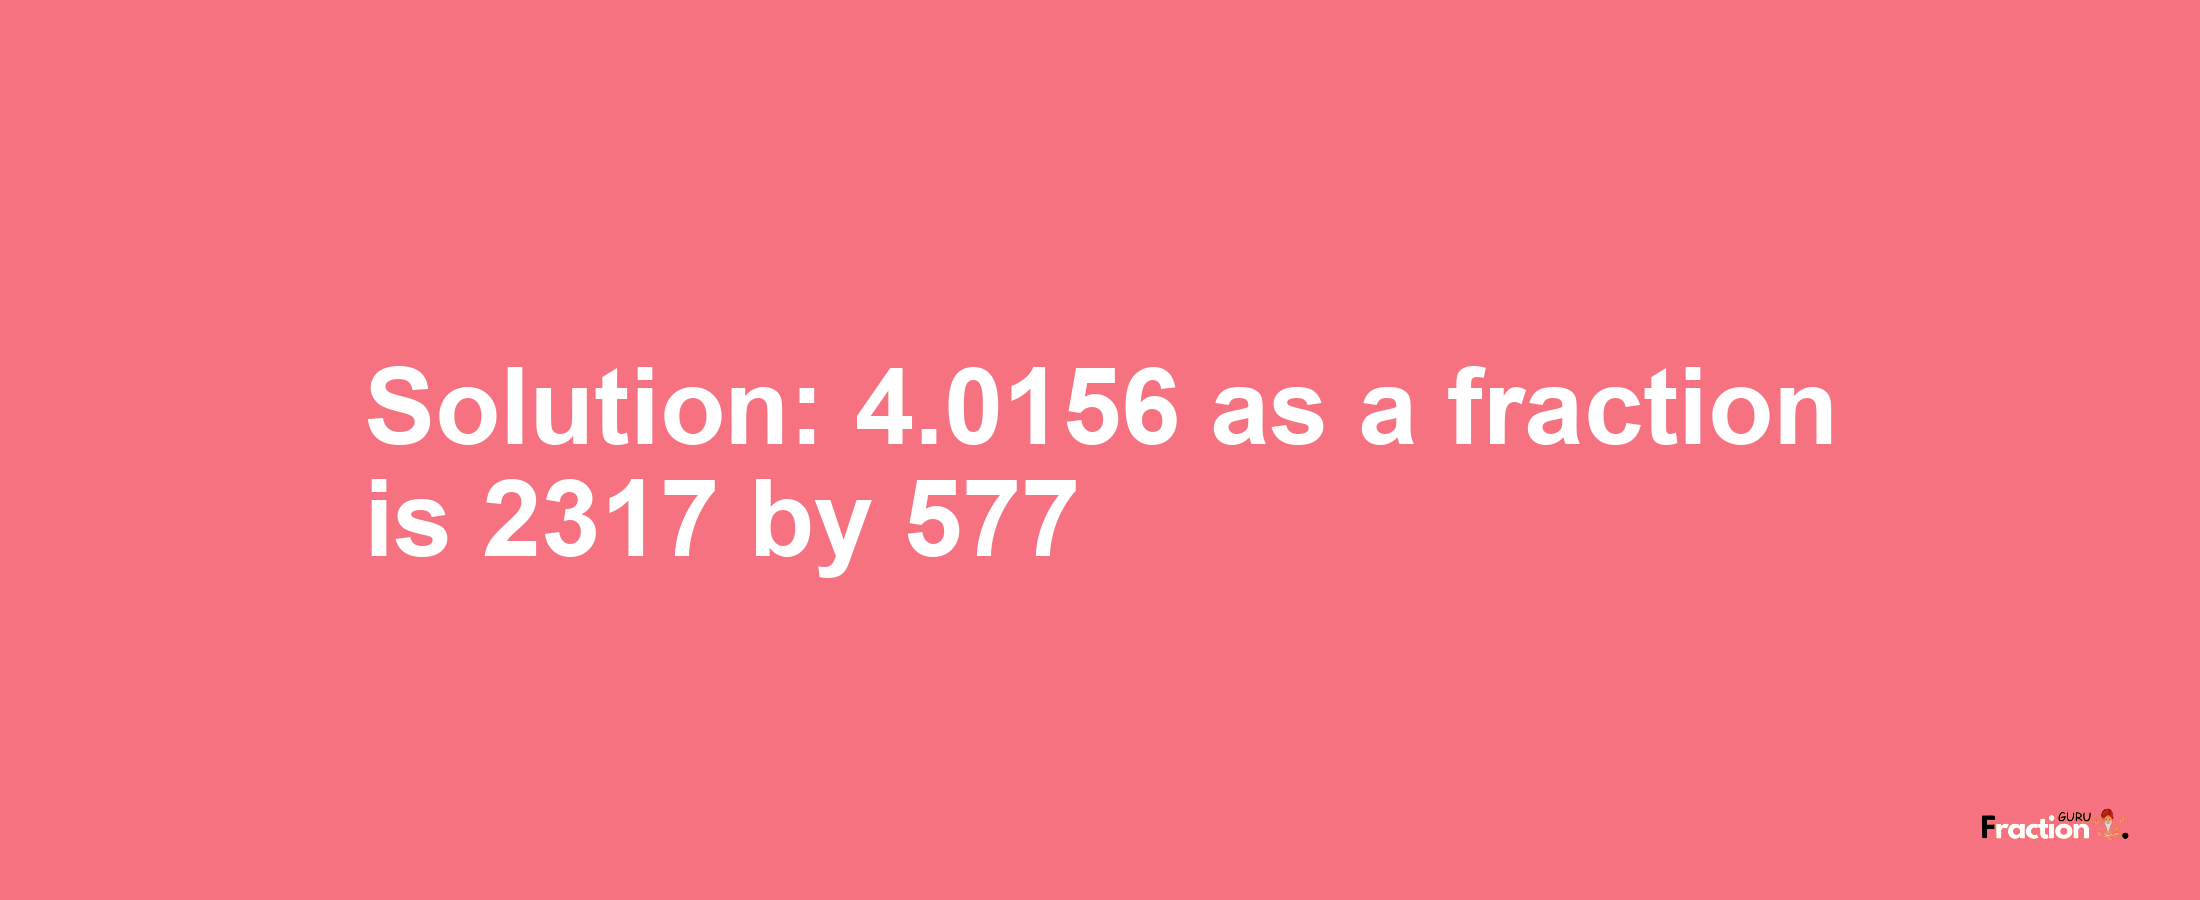 Solution:4.0156 as a fraction is 2317/577